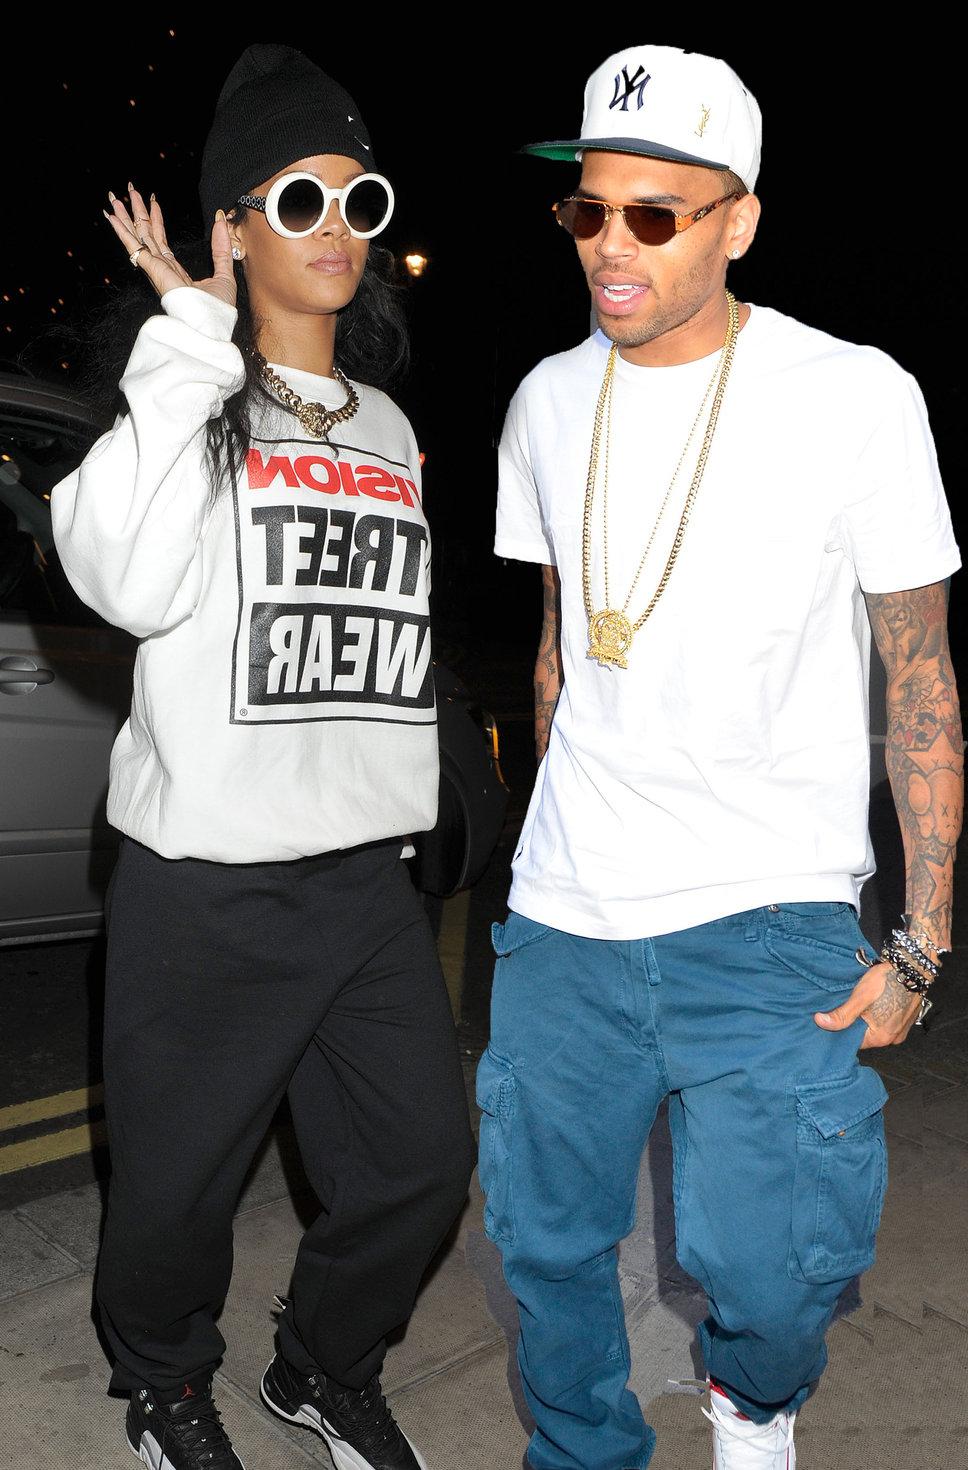 Rihanna and Chris Brown 10 million dollar show at a private party in Cote D'ivoire